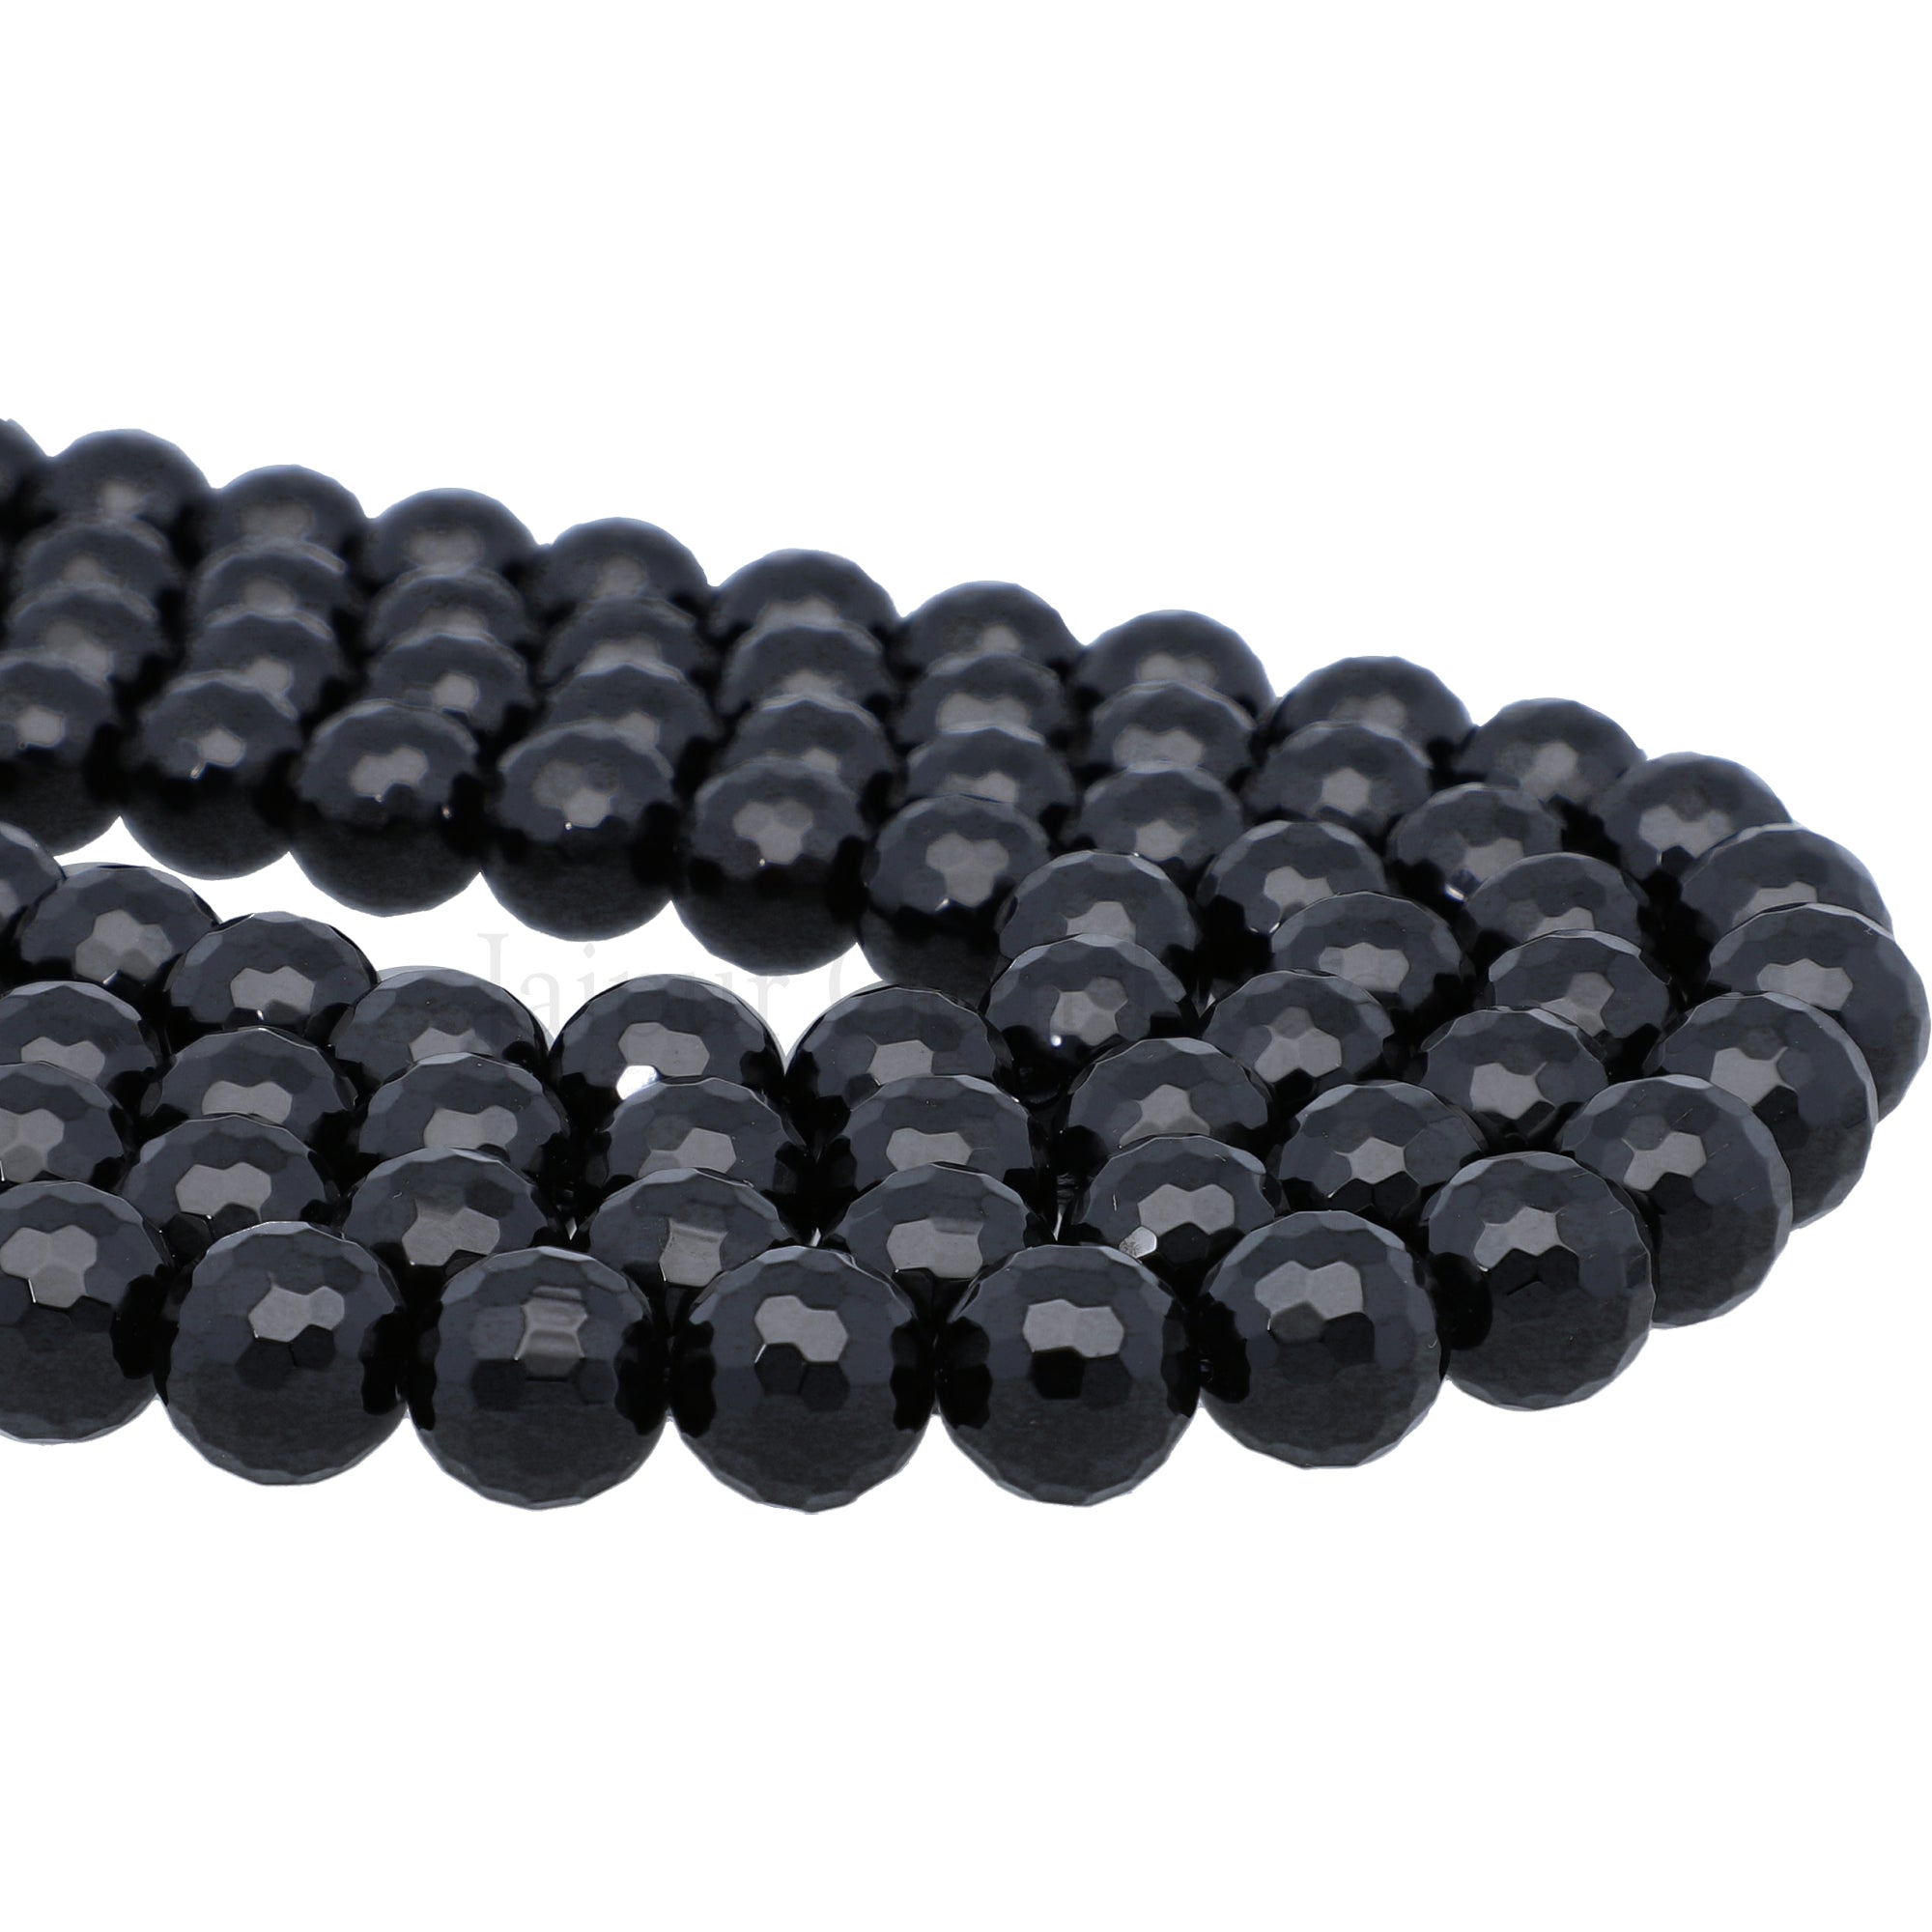 Black Onyx 10 MM Faceted Round Shape Beads Strand